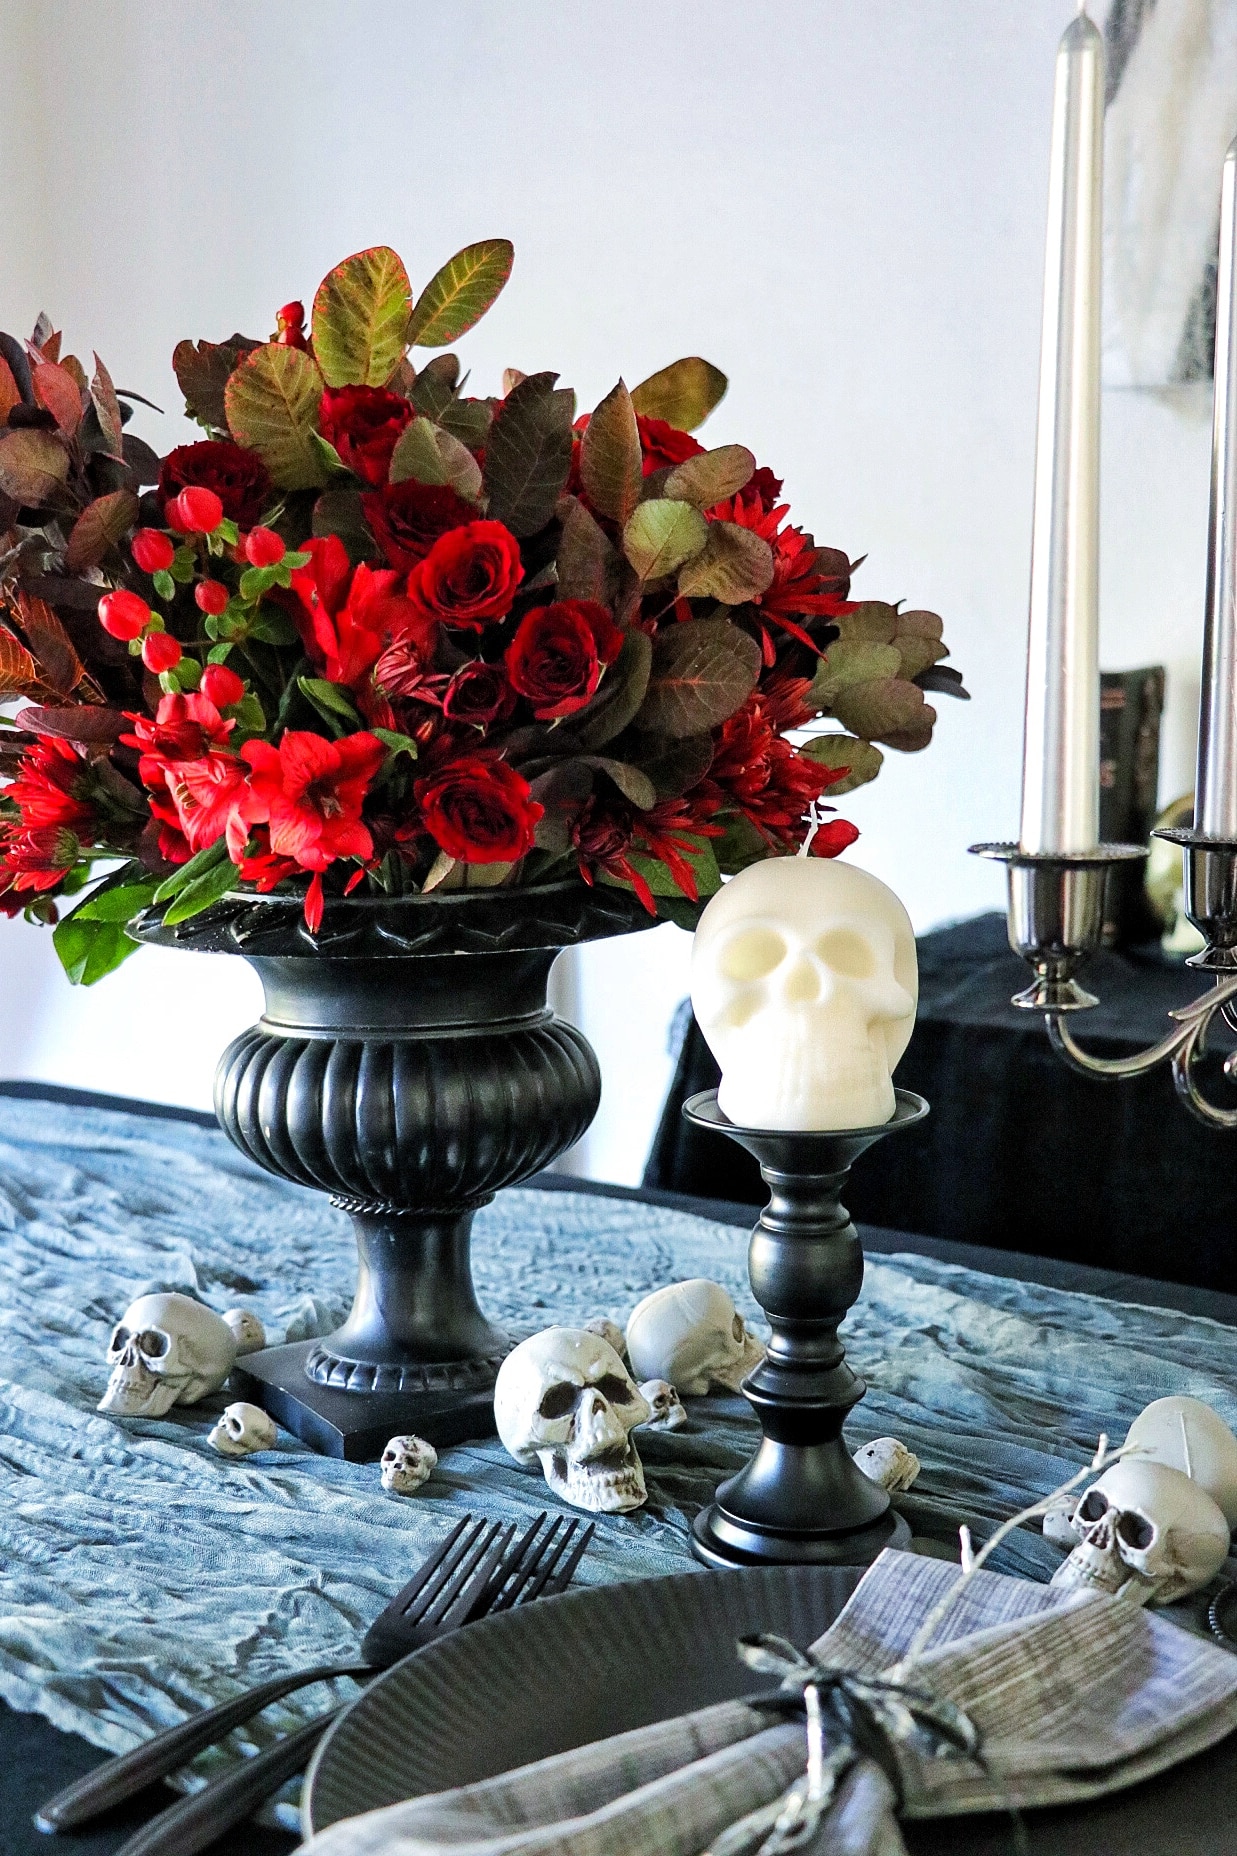 Halloween floral centerpieces for a chic and spooky tablescape